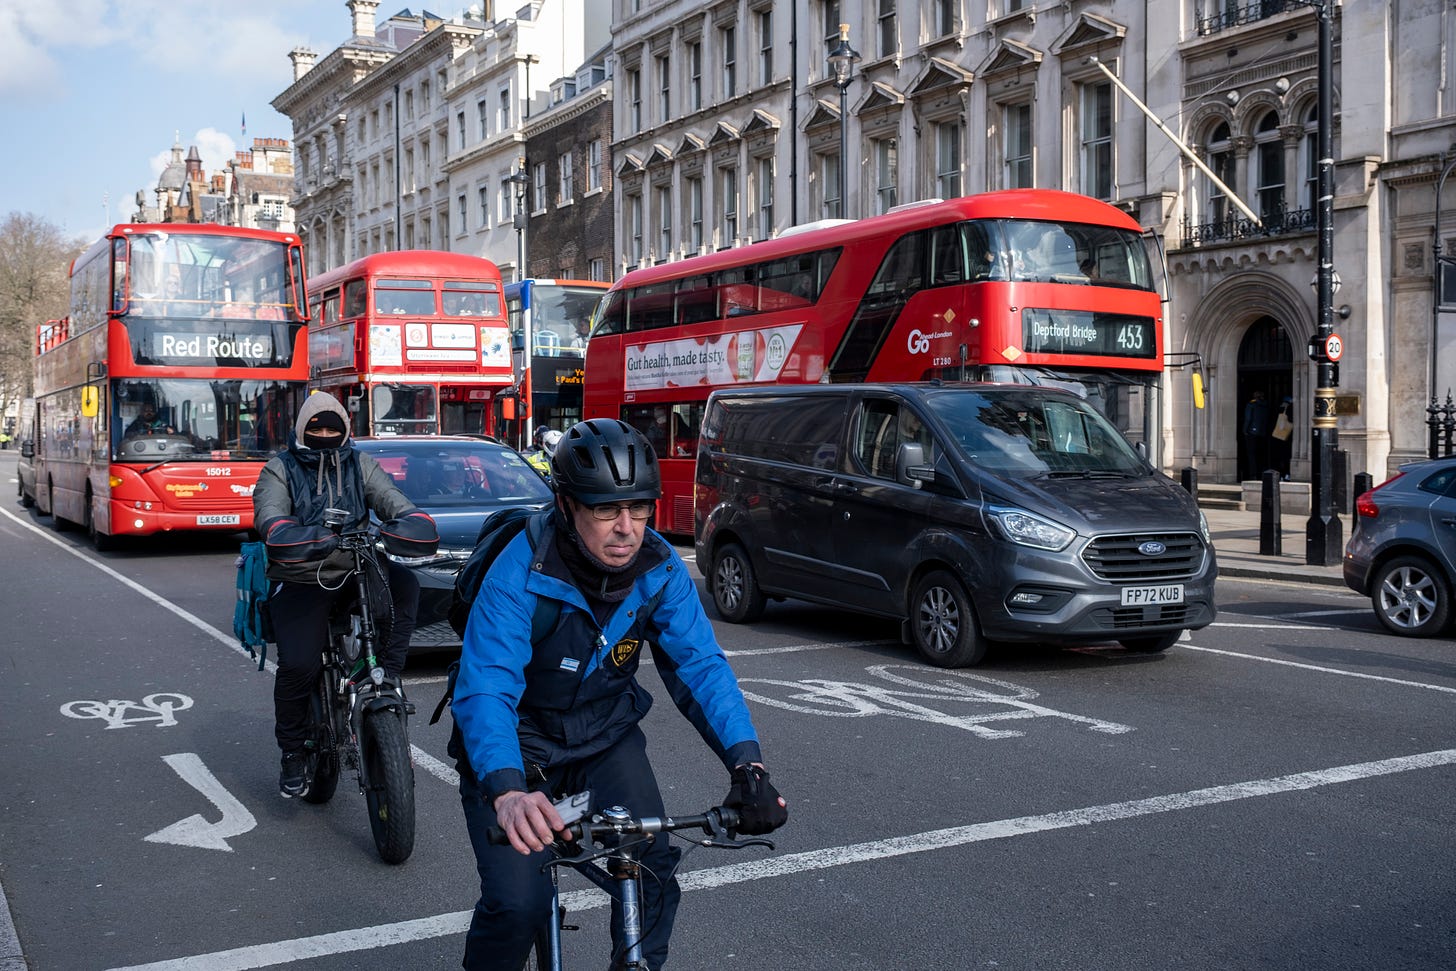 Photo: cyclists and buses share space on a central London road.